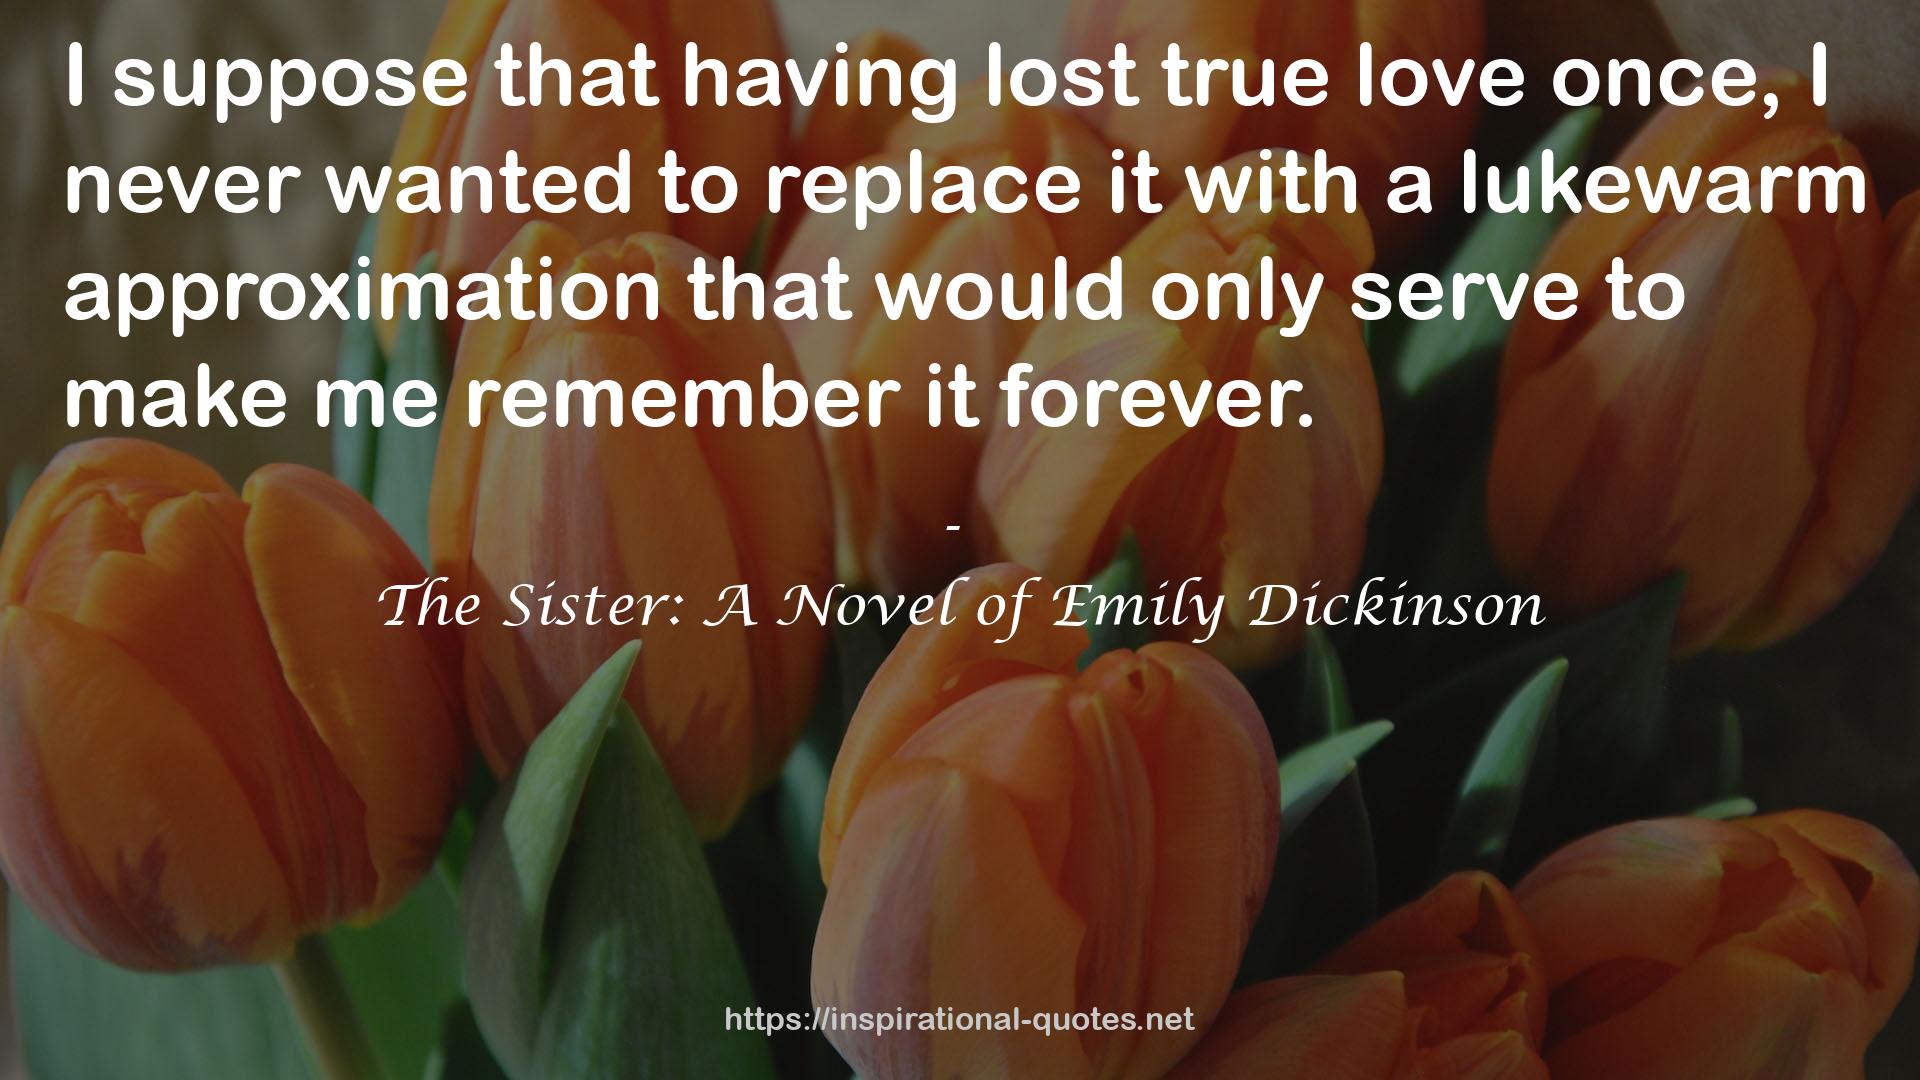 The Sister: A Novel of Emily Dickinson QUOTES